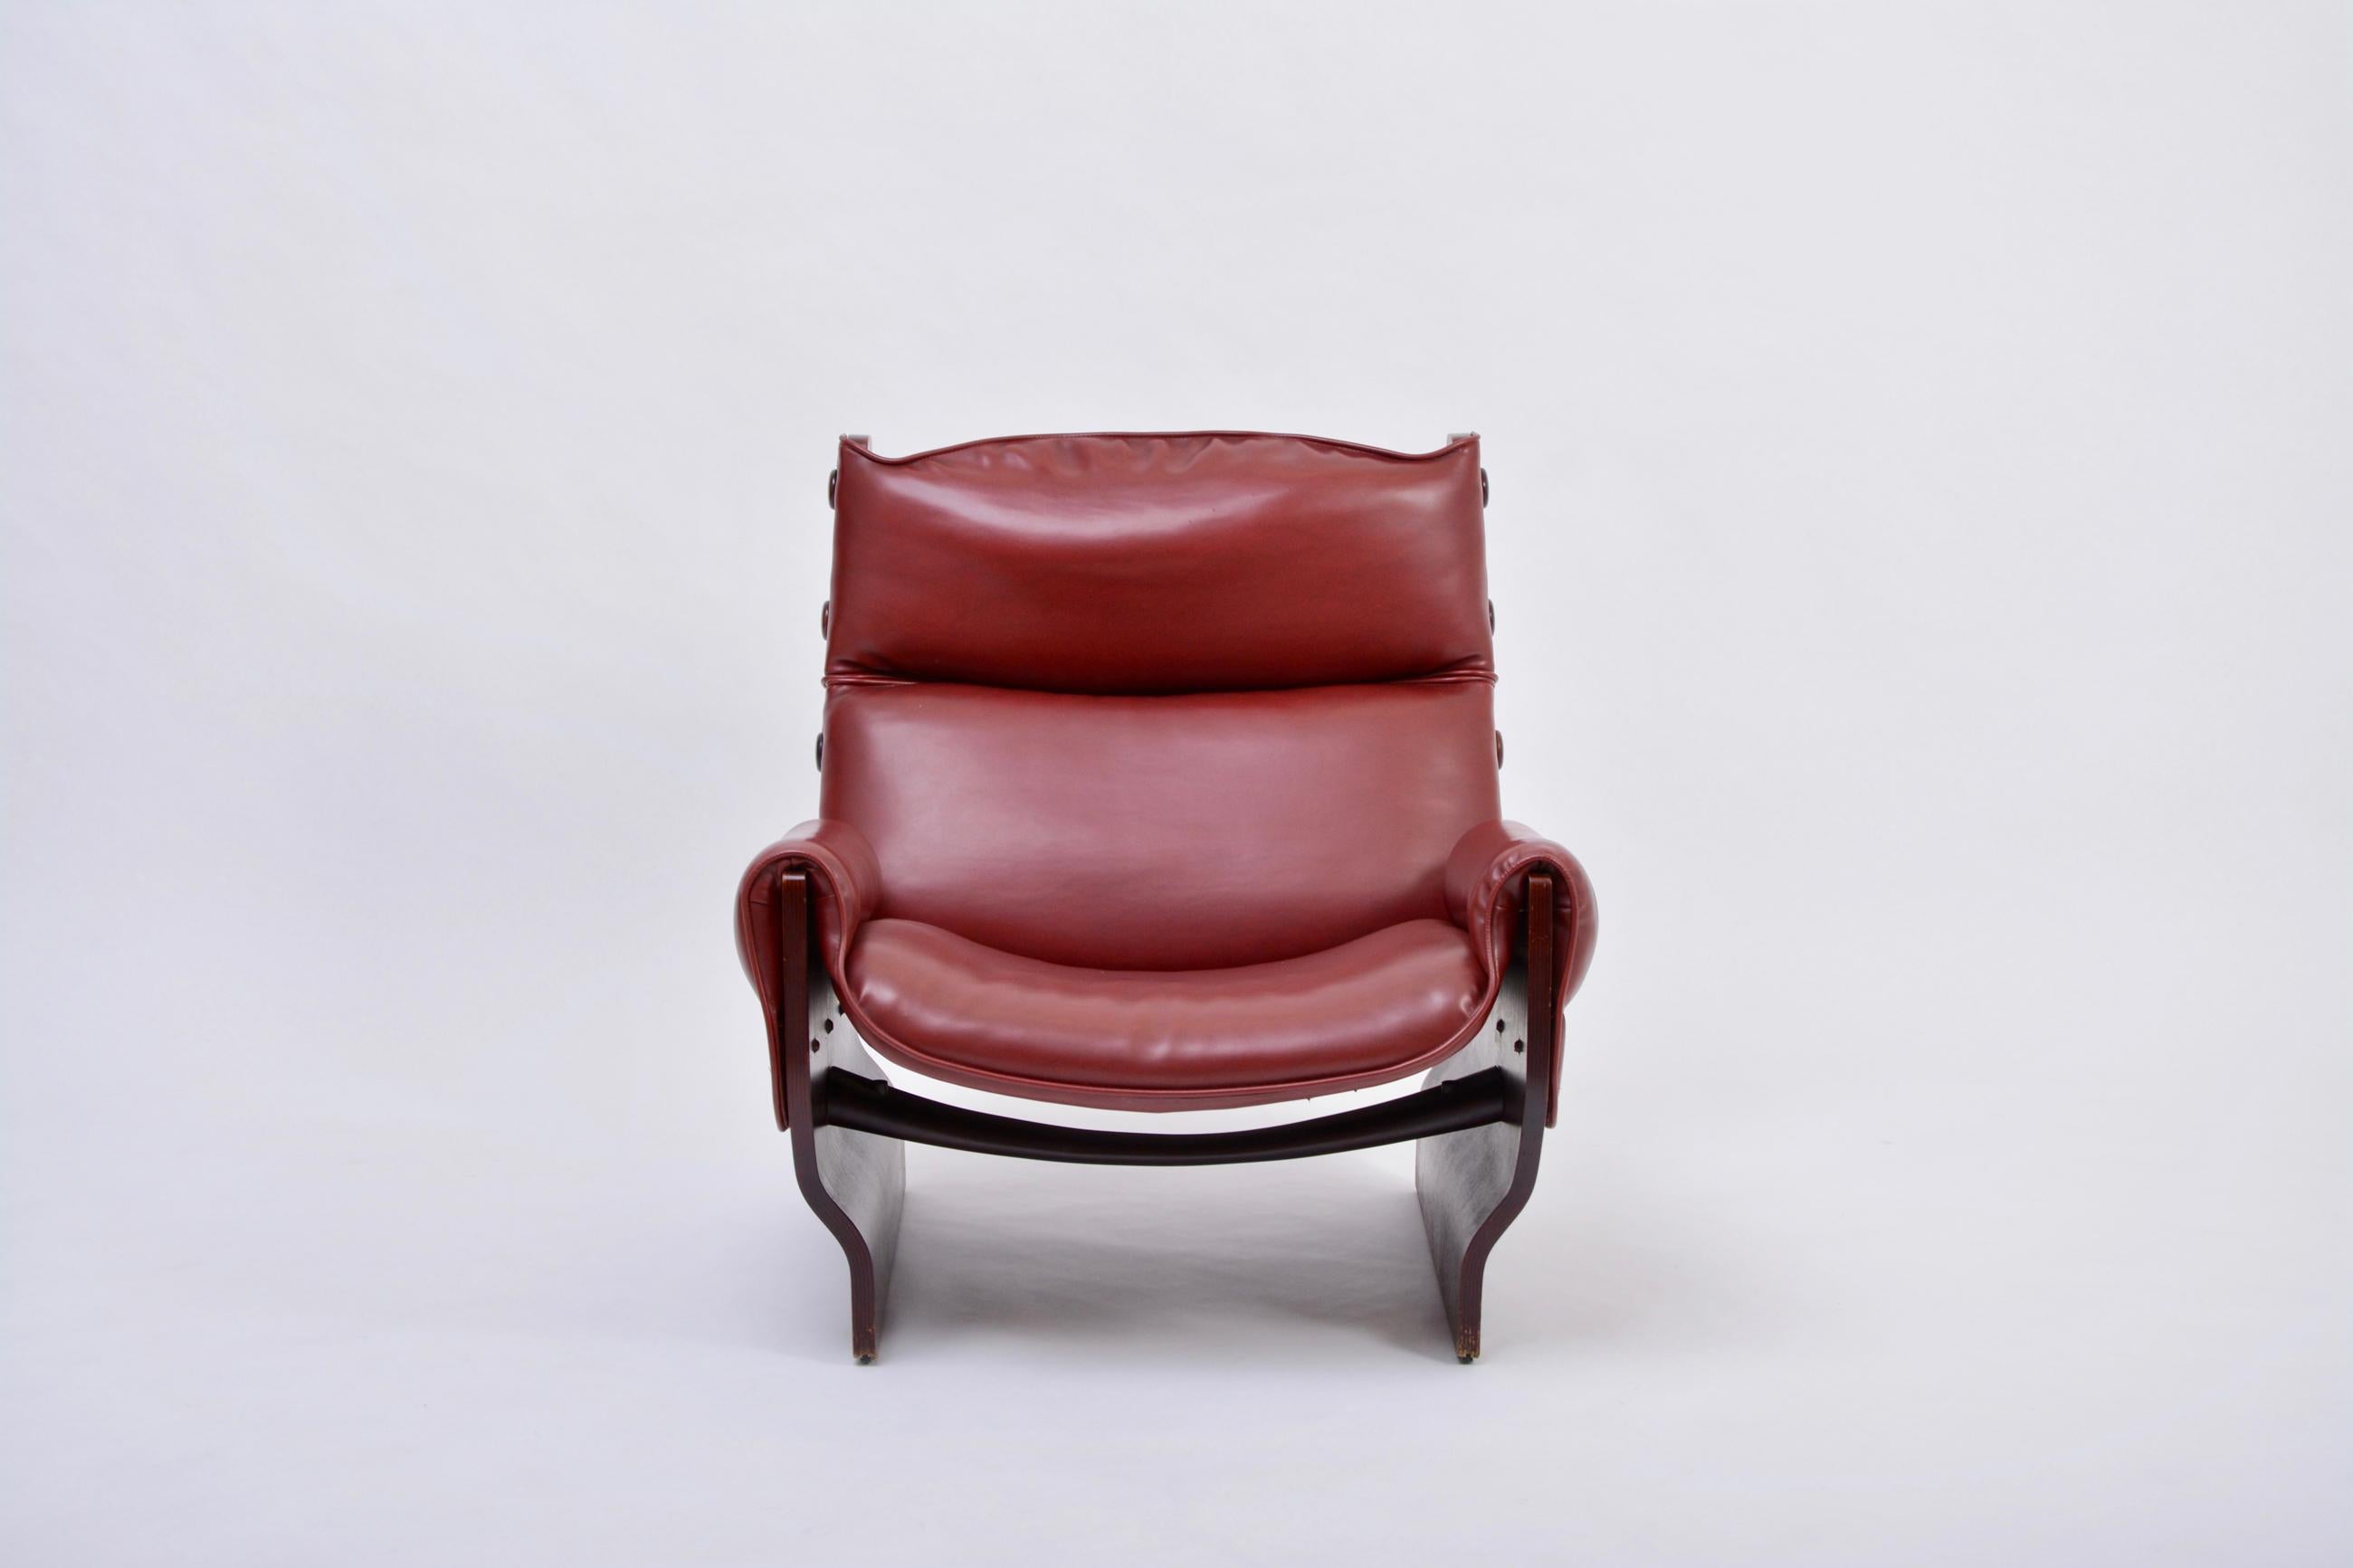 Mid-Century Modern P110 'Canada' lounge chair by Osvaldo Borsani for Tecno.
An iconic design by one of the most important Italian designers, the so called 